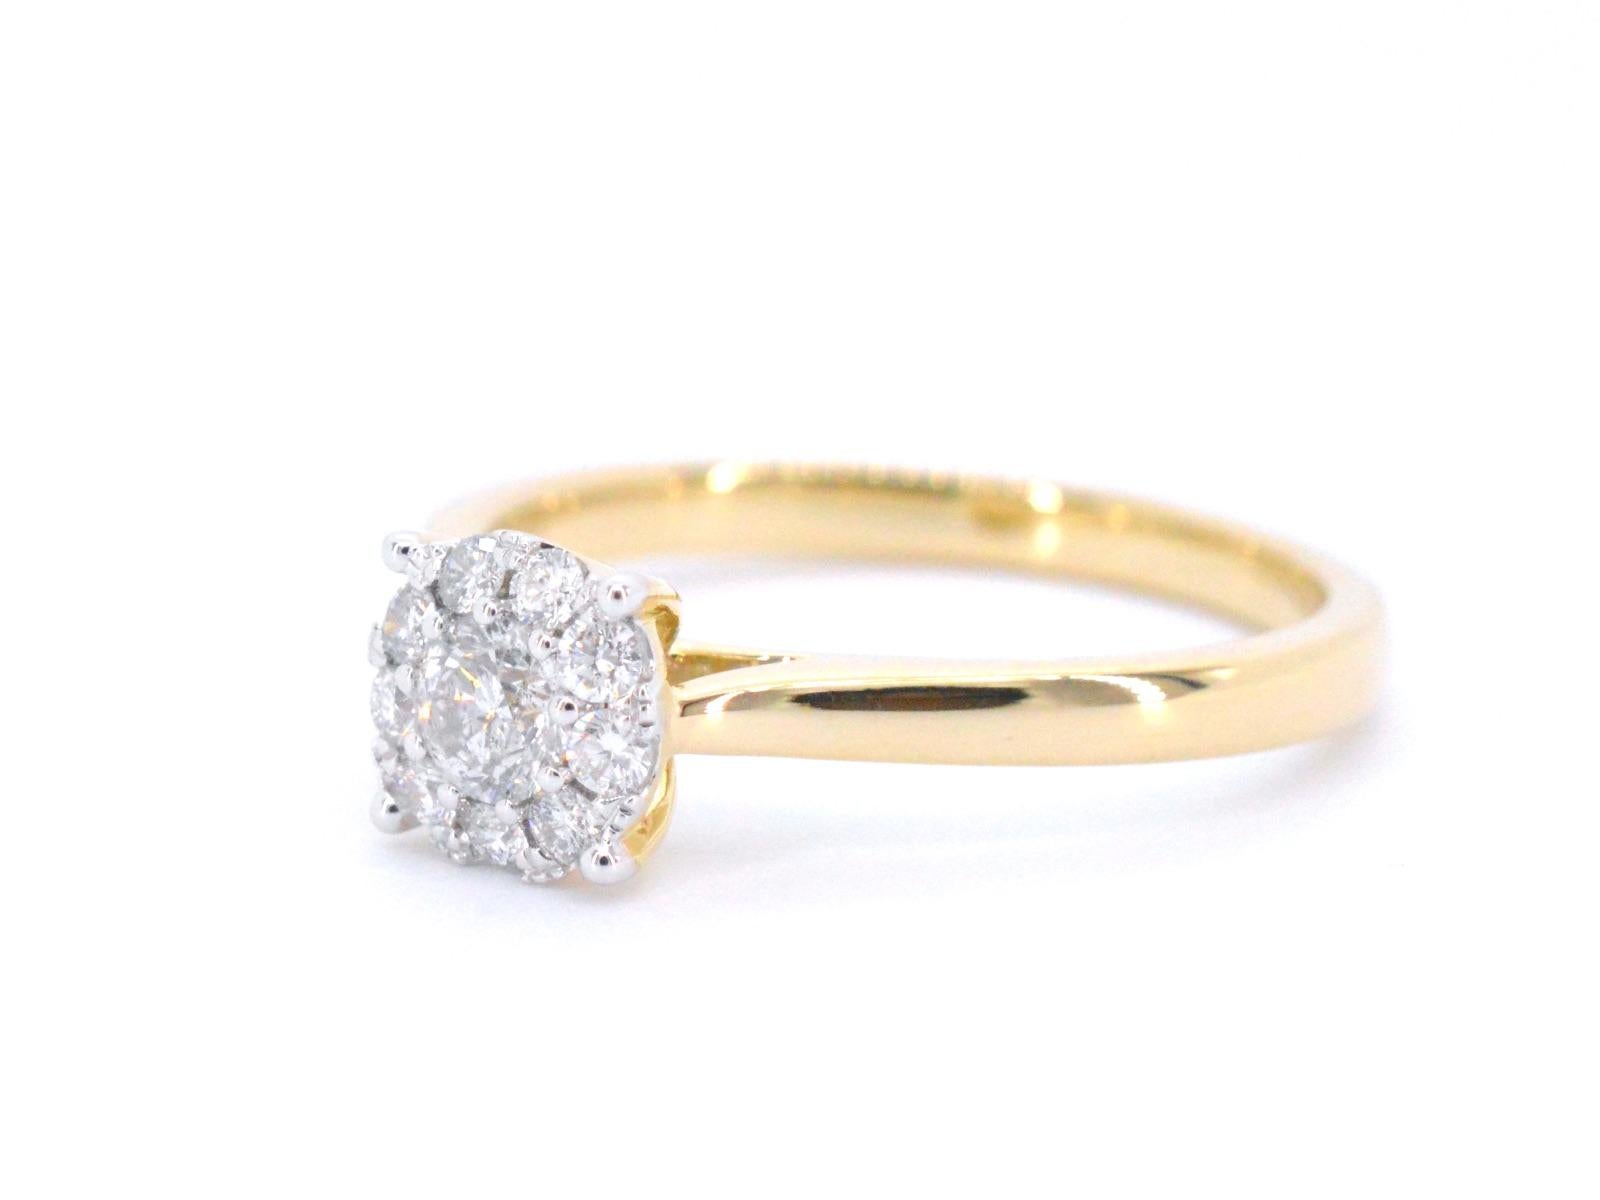 The yellow golden entourage ring with diamonds is a stunning piece of jewelry that features a combination of brilliant-cut diamonds. Crafted from 14K yellow gold, this ring has a timeless design that exudes elegance and sophistication. The entourage